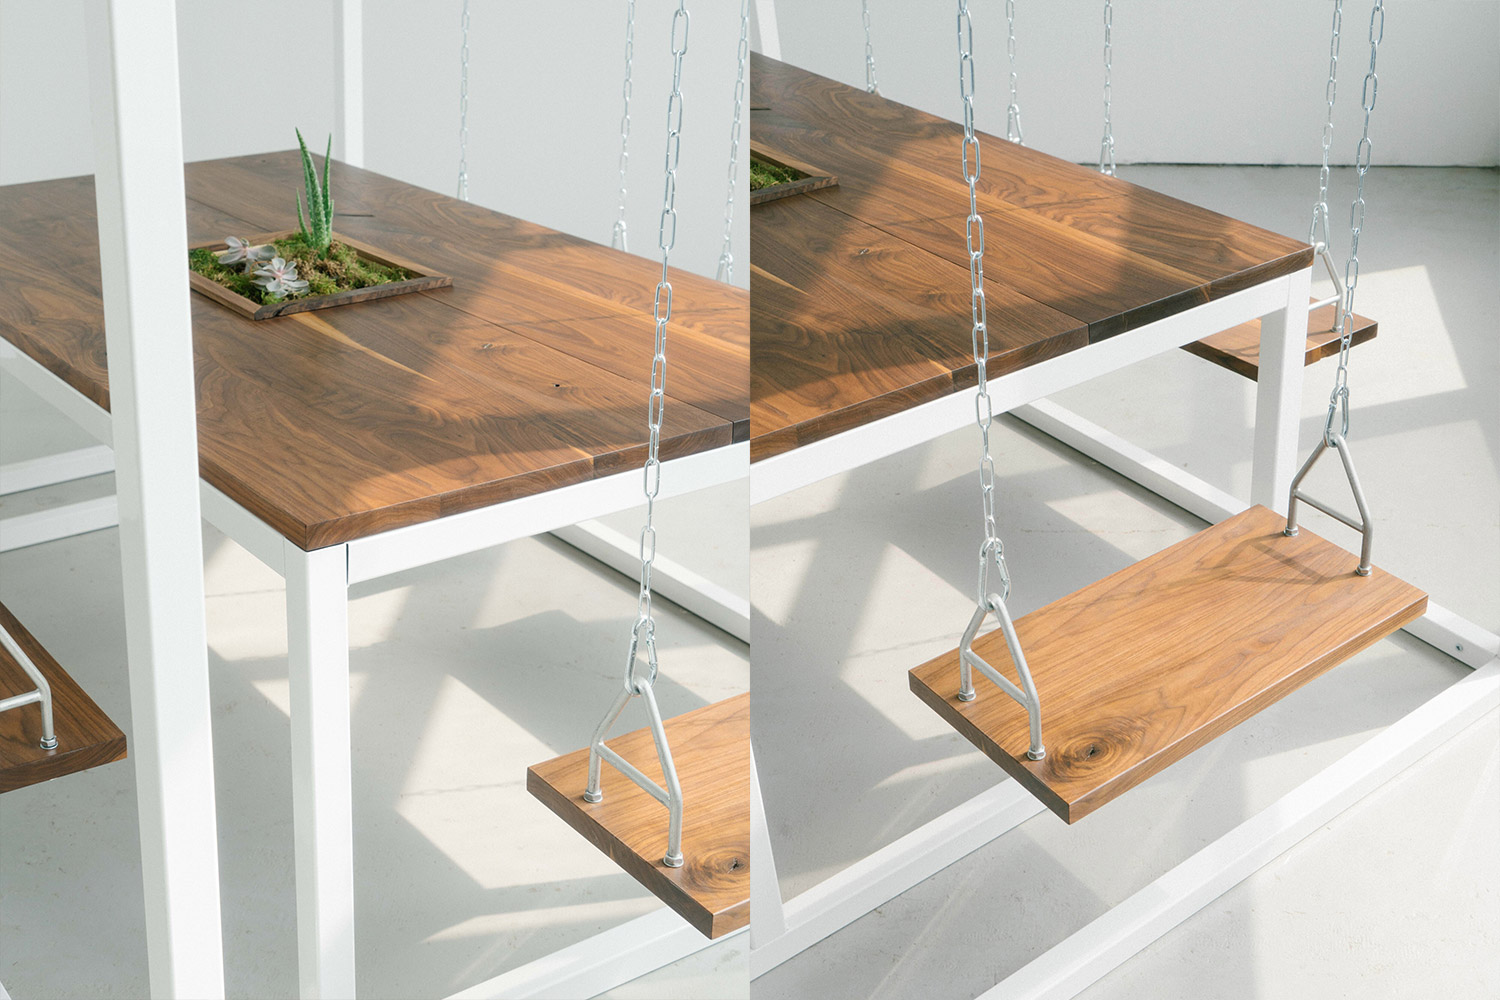 Swing Tables Let You Swing While You Eat or Have a Meeting